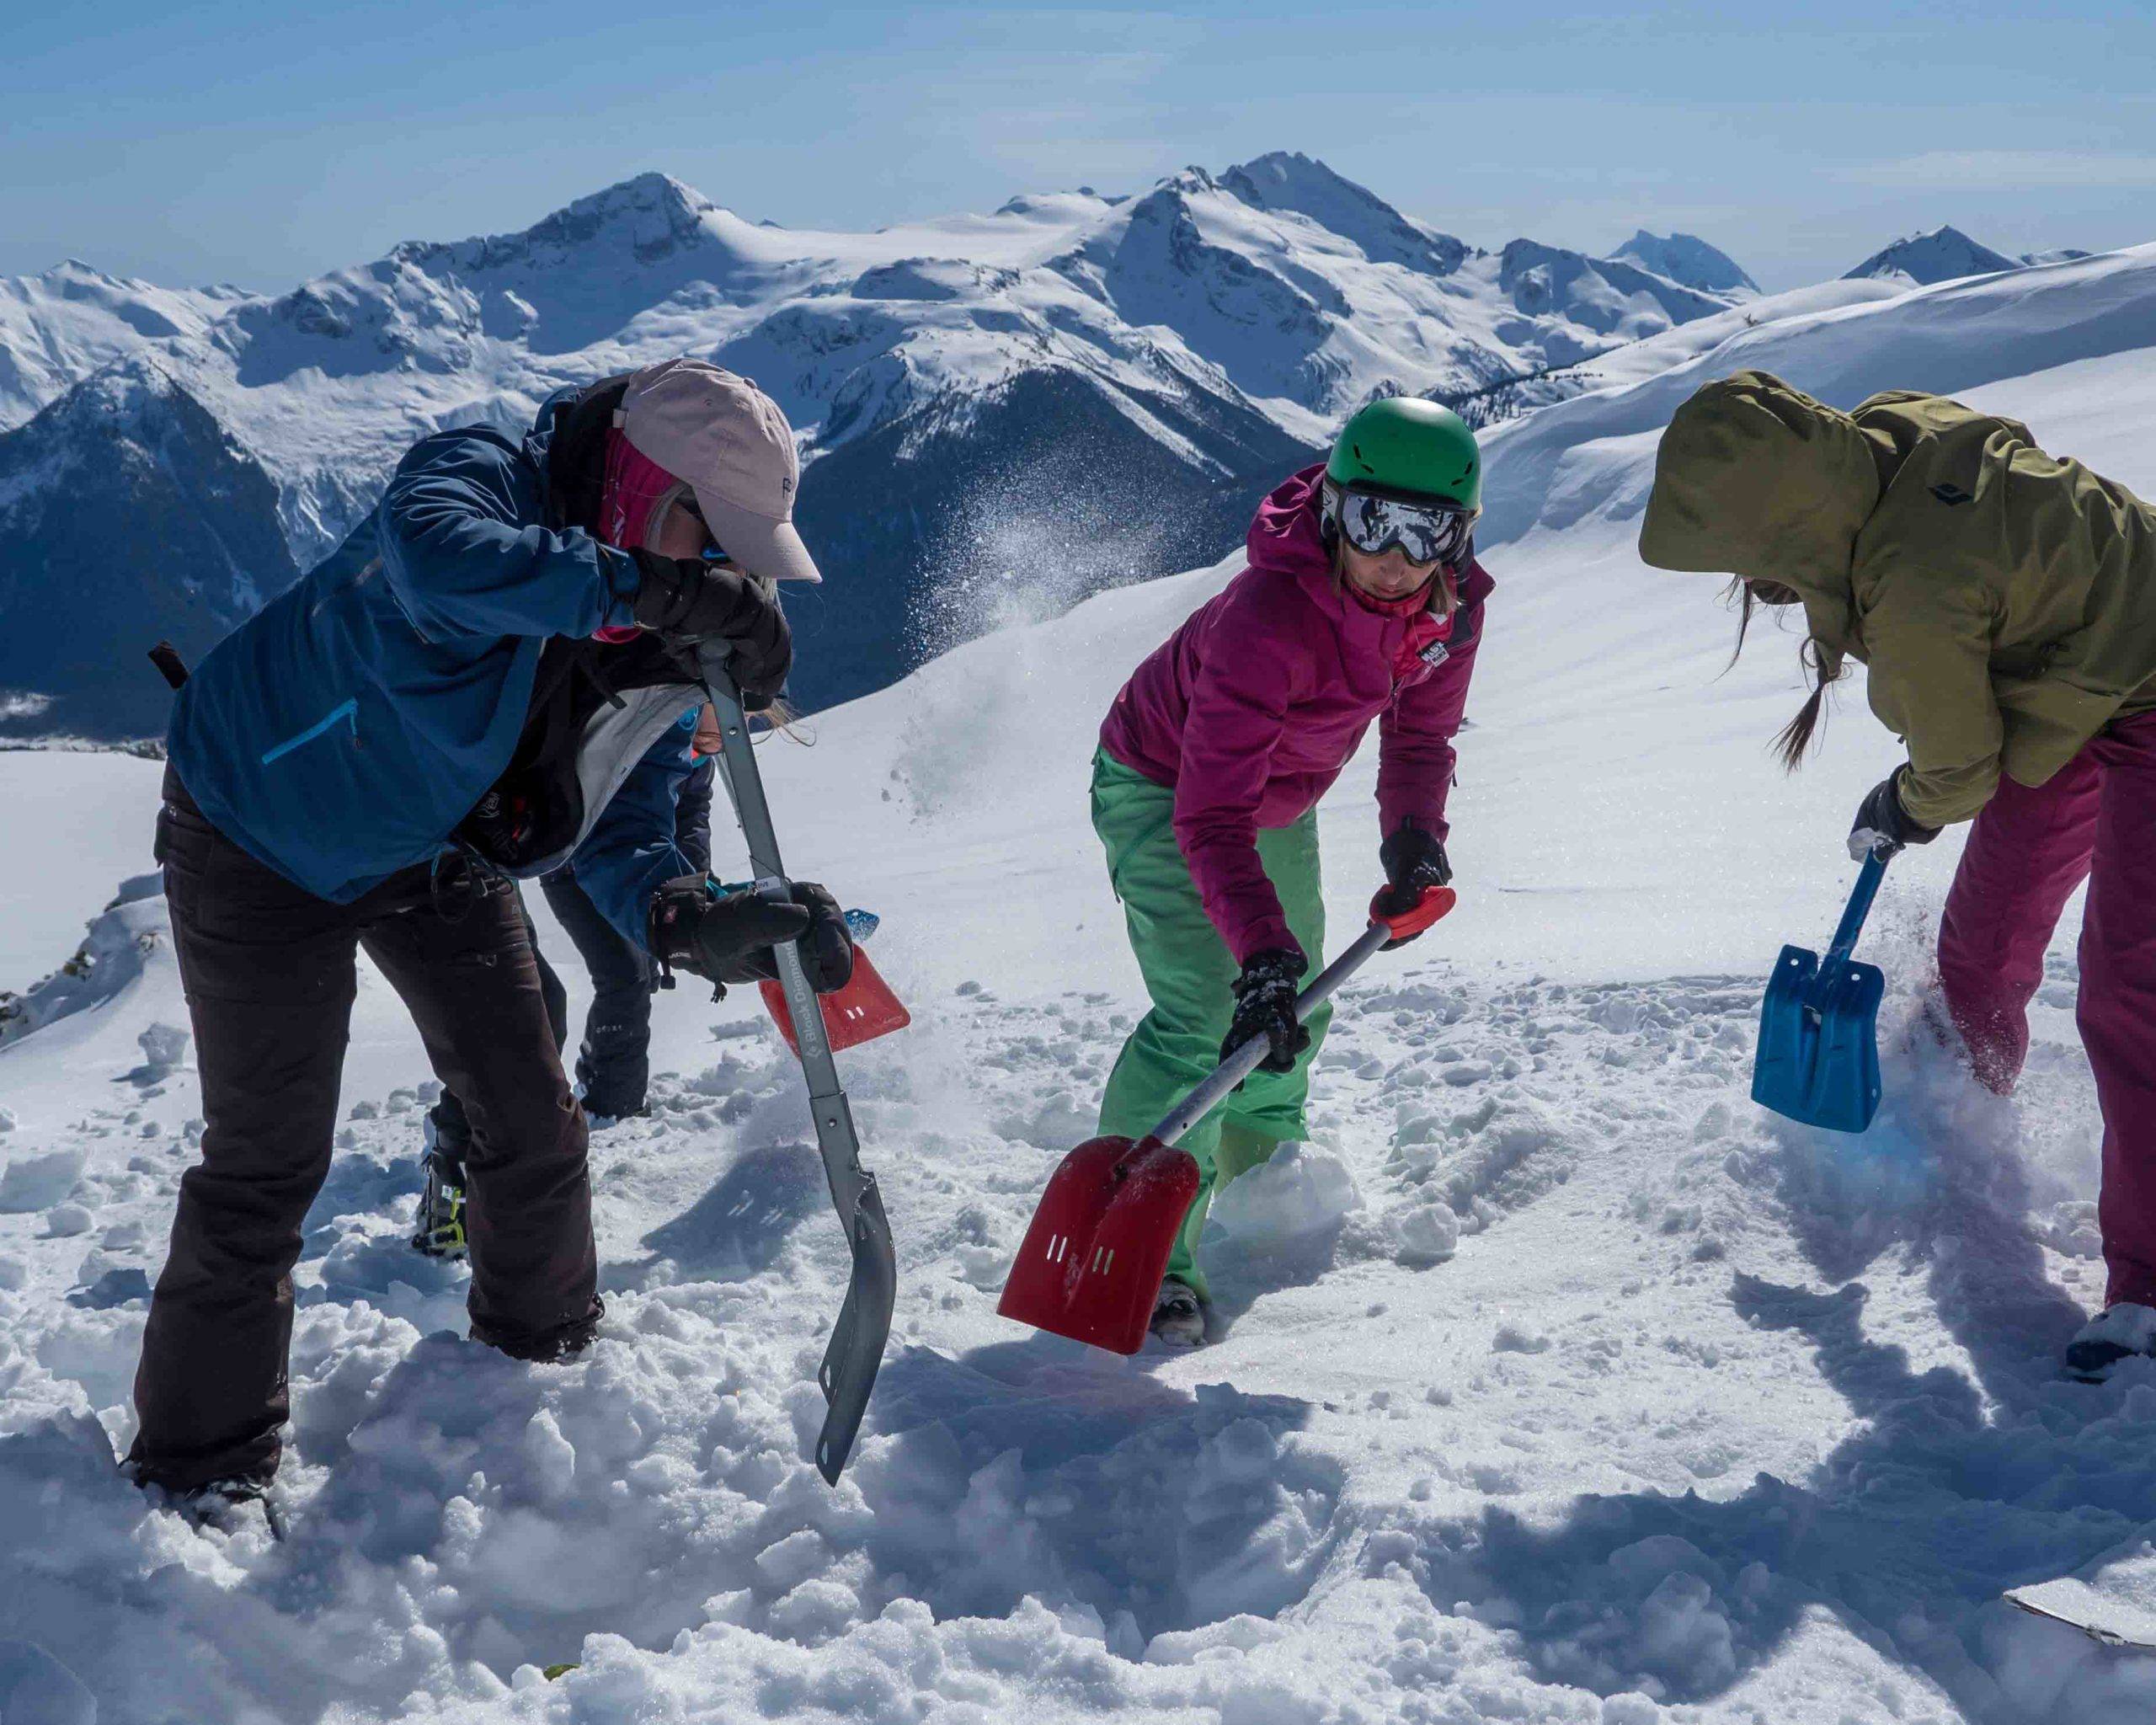 Digging for buried victim during avalanche skills course